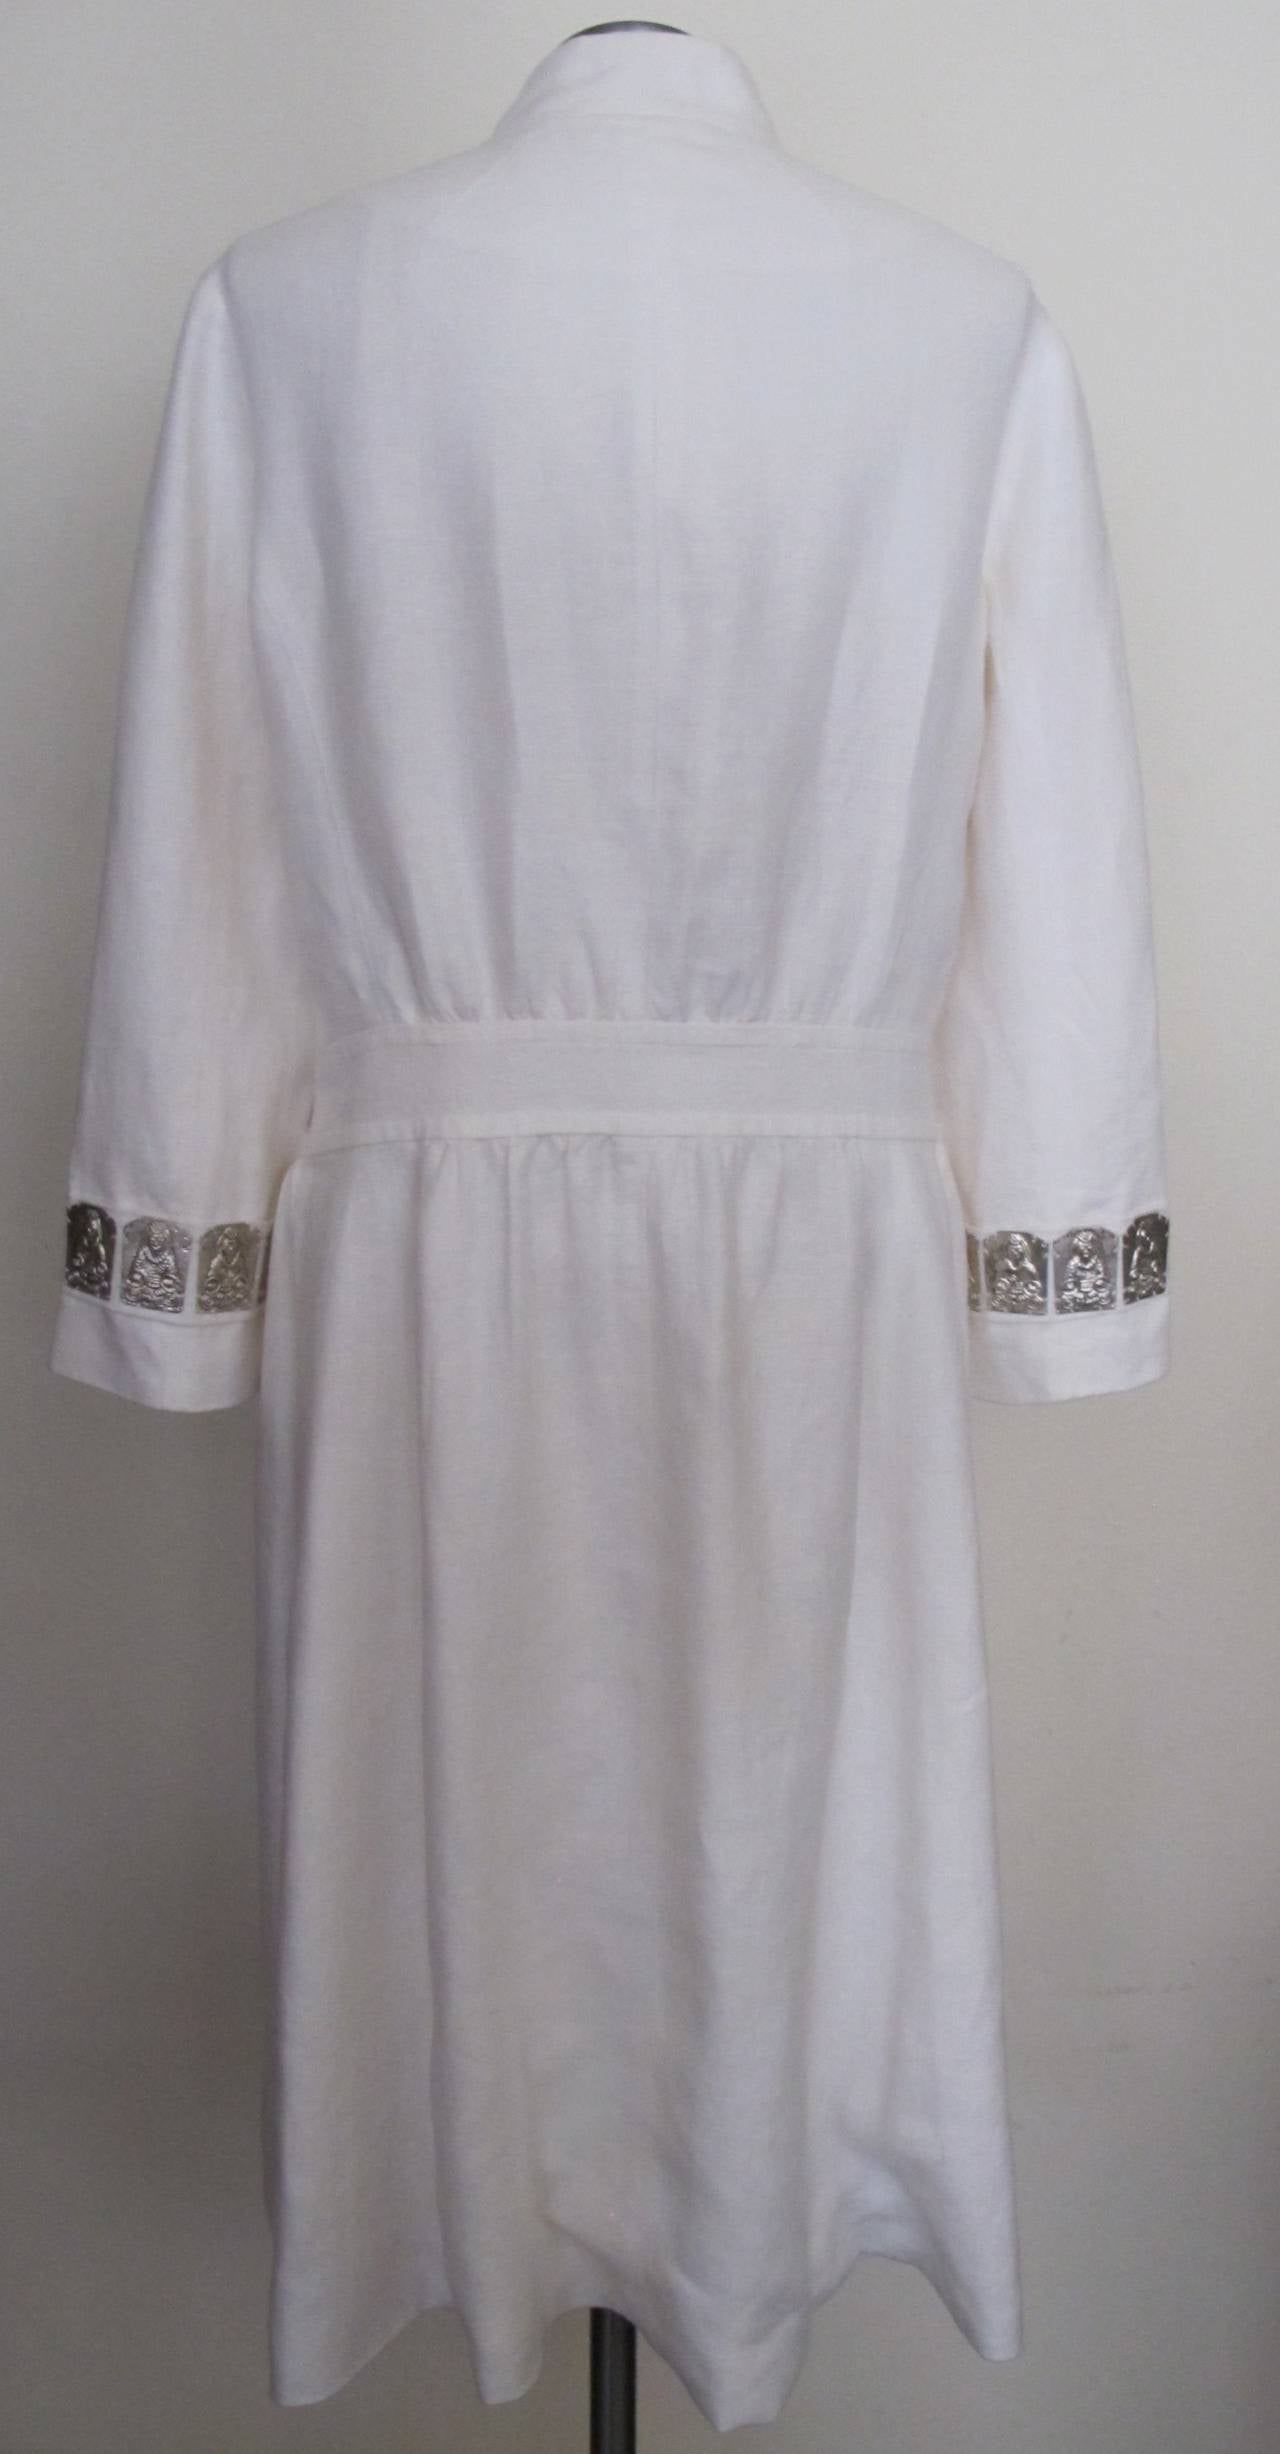 Vivienne Tam 1990's White Linen Dress with Silver Buddha Medallions In Excellent Condition For Sale In San Francisco, CA